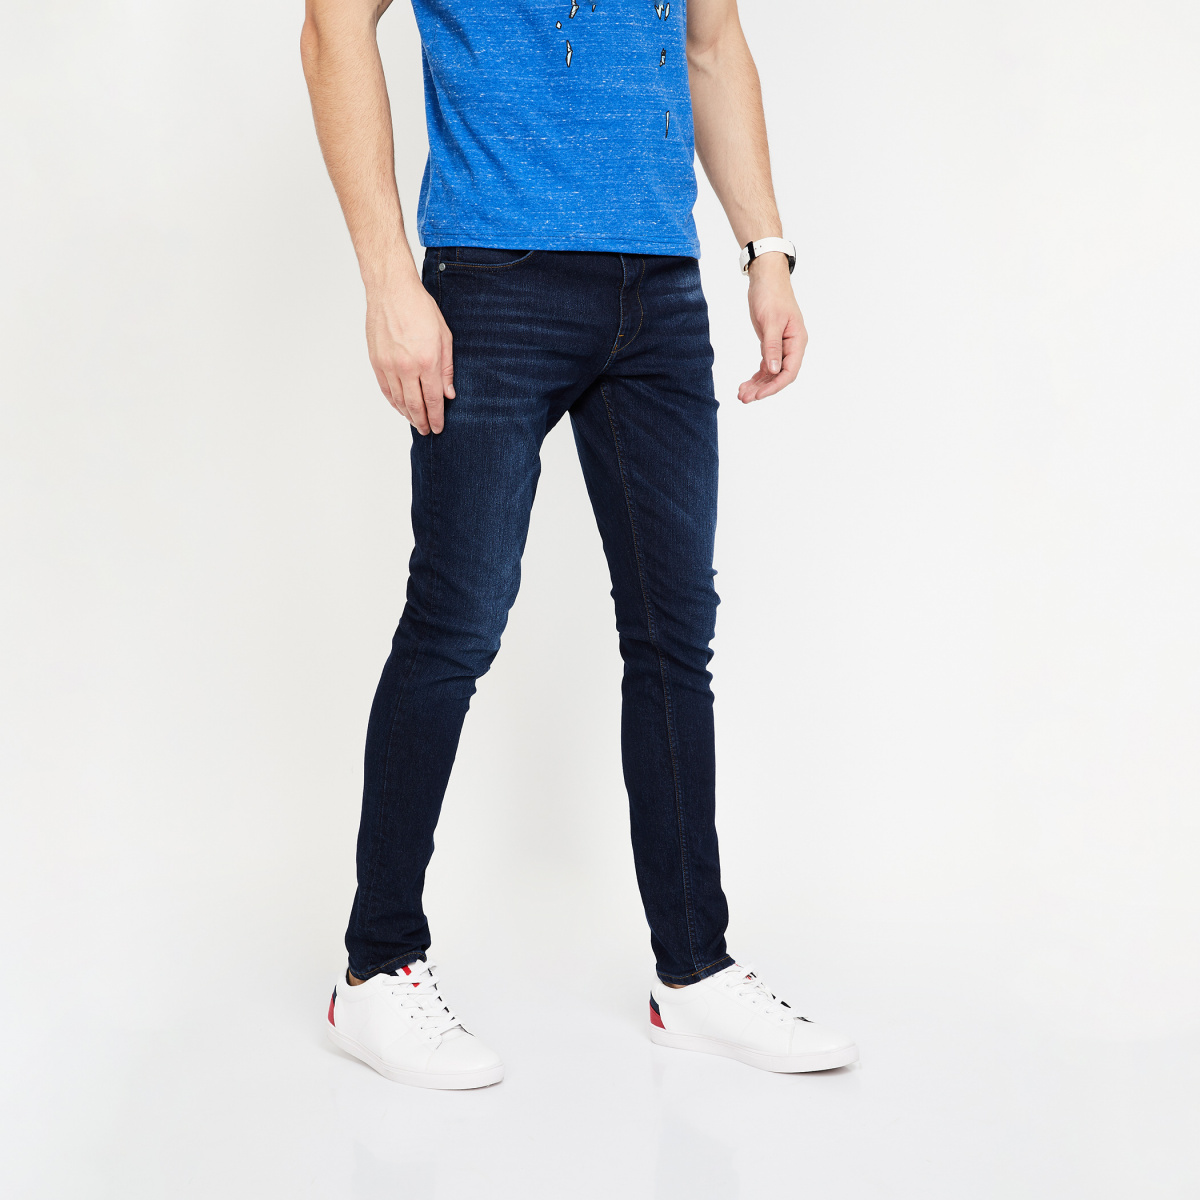 LEE Bruce Stonewashed Skinny Fit Jeans 